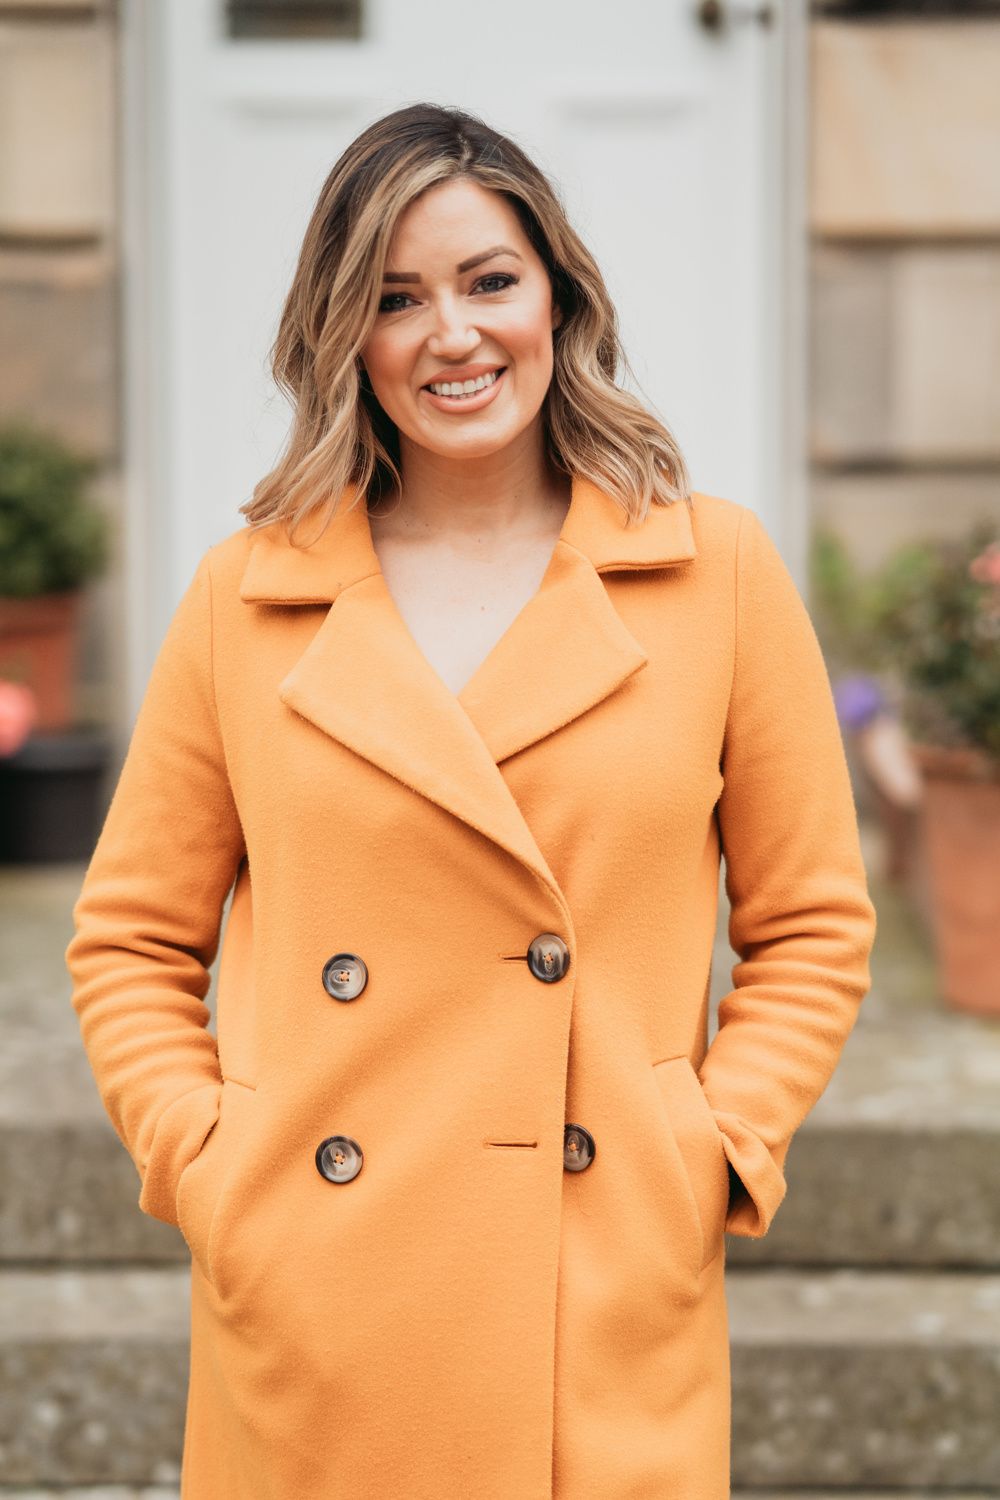 Young woman smiling in an orange coat